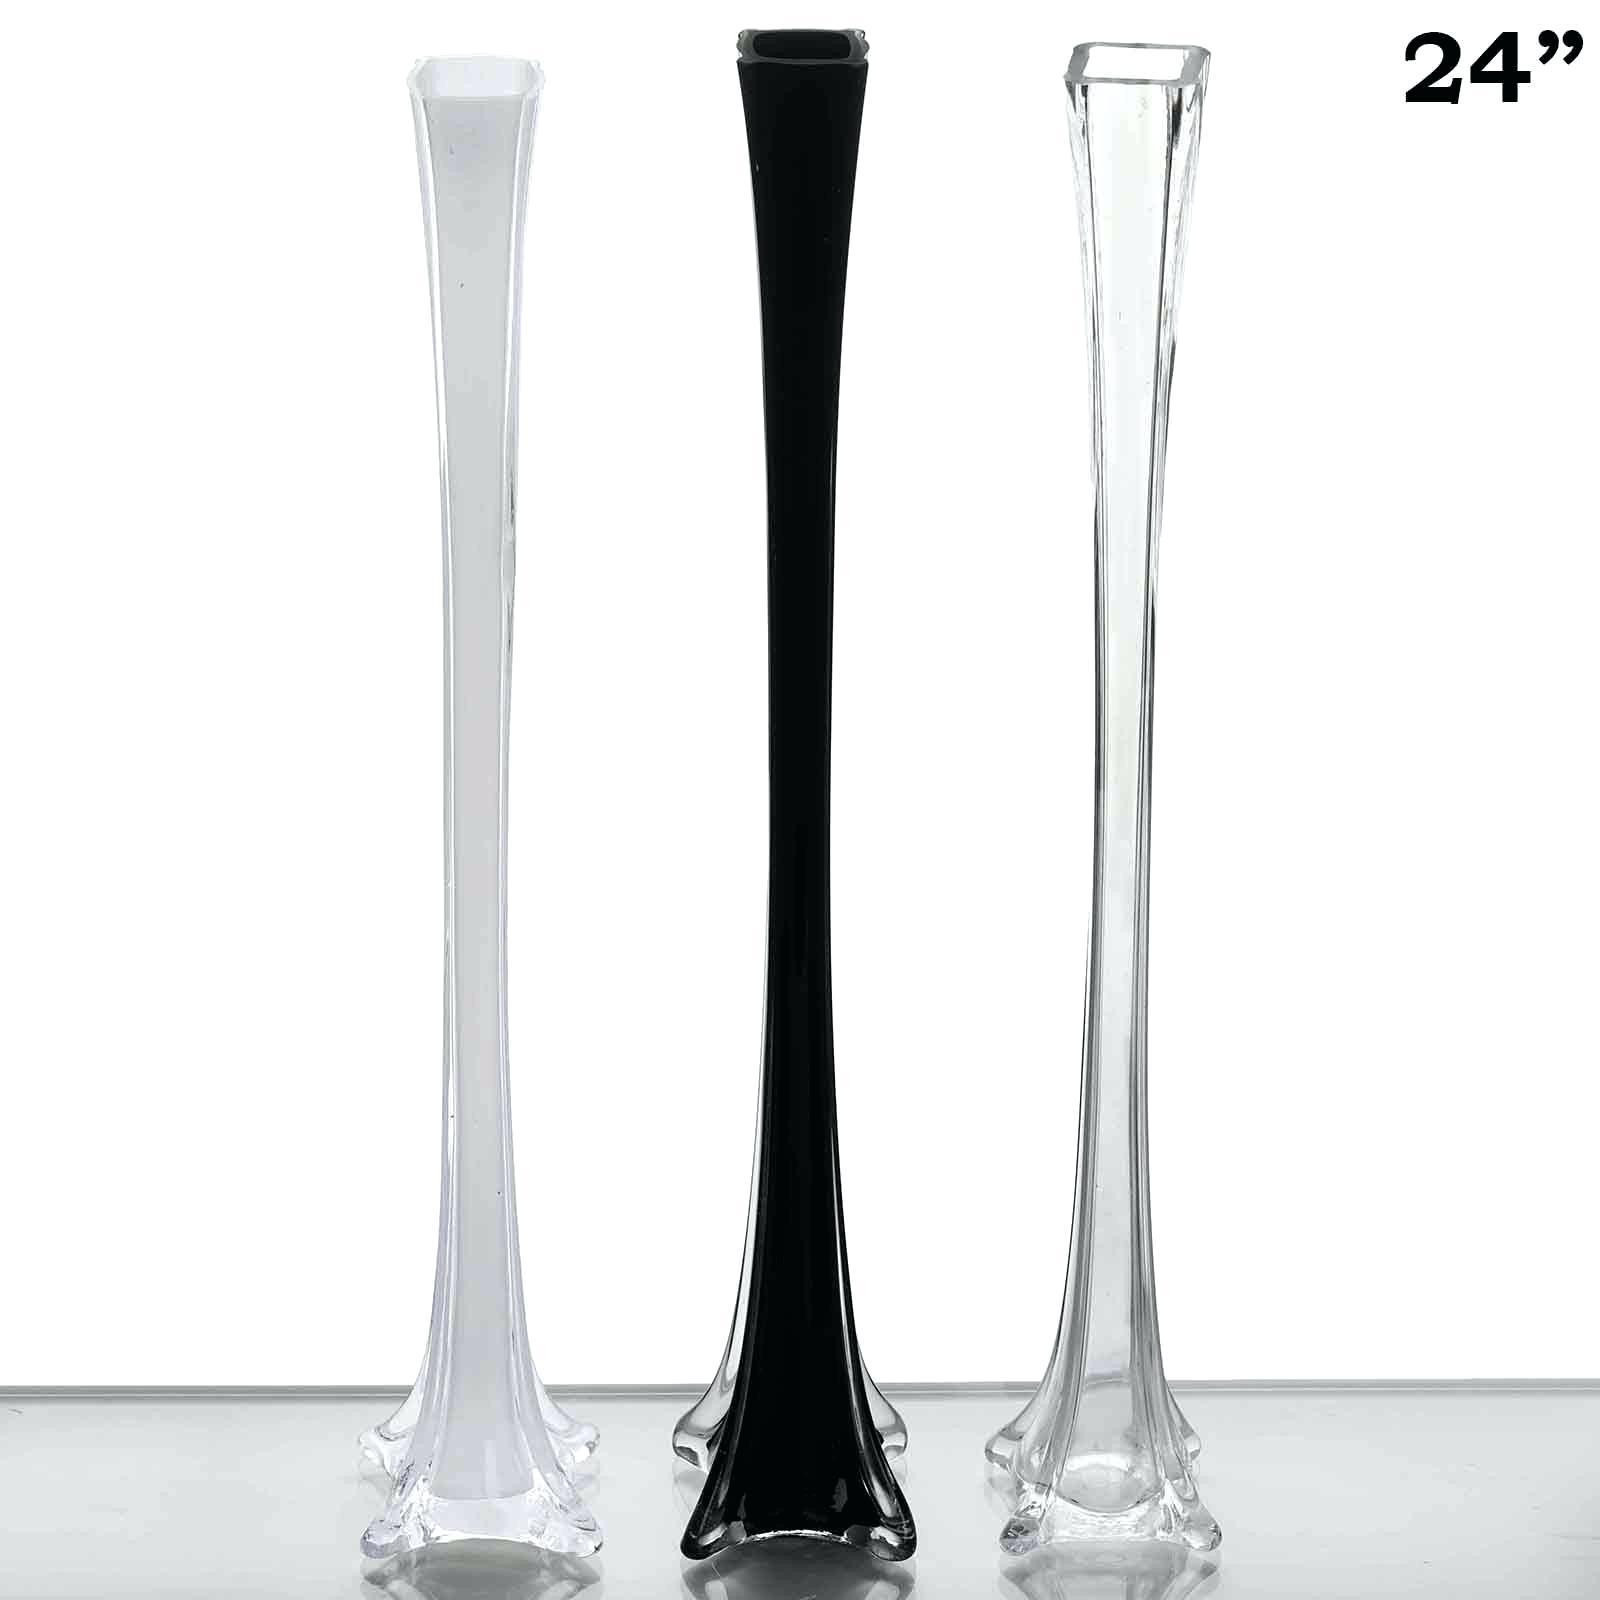 28 Trendy Modern Clear Glass Vases 2024 free download modern clear glass vases of fantastic chair decor ideas from living room vases wholesale awesome inside fantastic chair decor ideas from living room vases wholesale awesome cheap glass vases